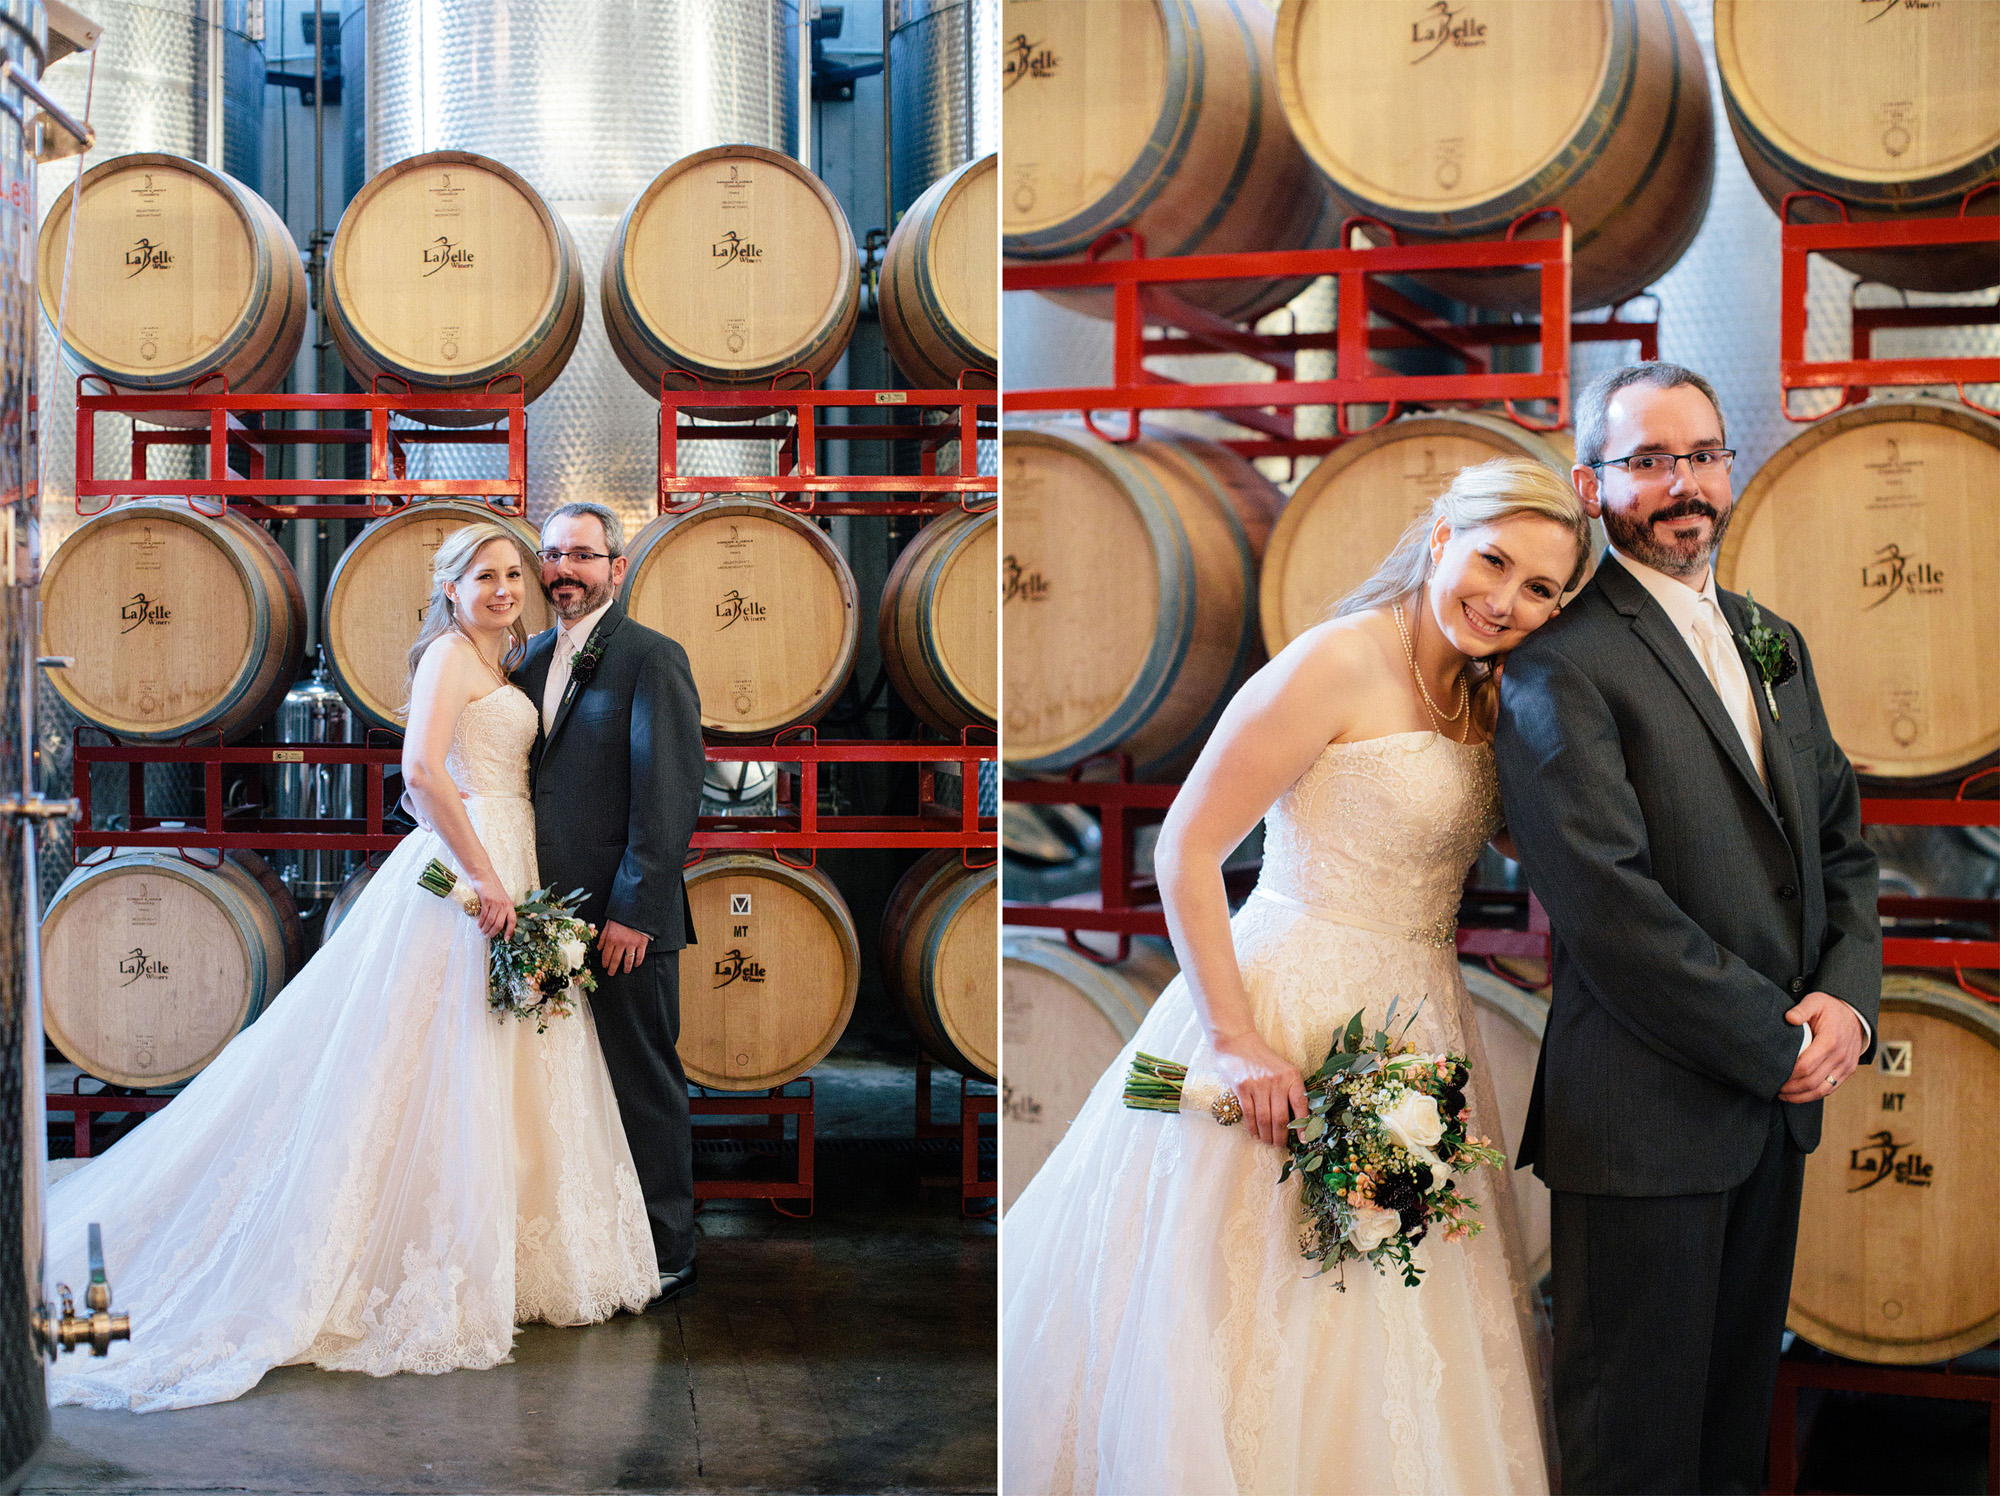 kate_preftakes_photography_NH_Labelle_Winery_wedding0043